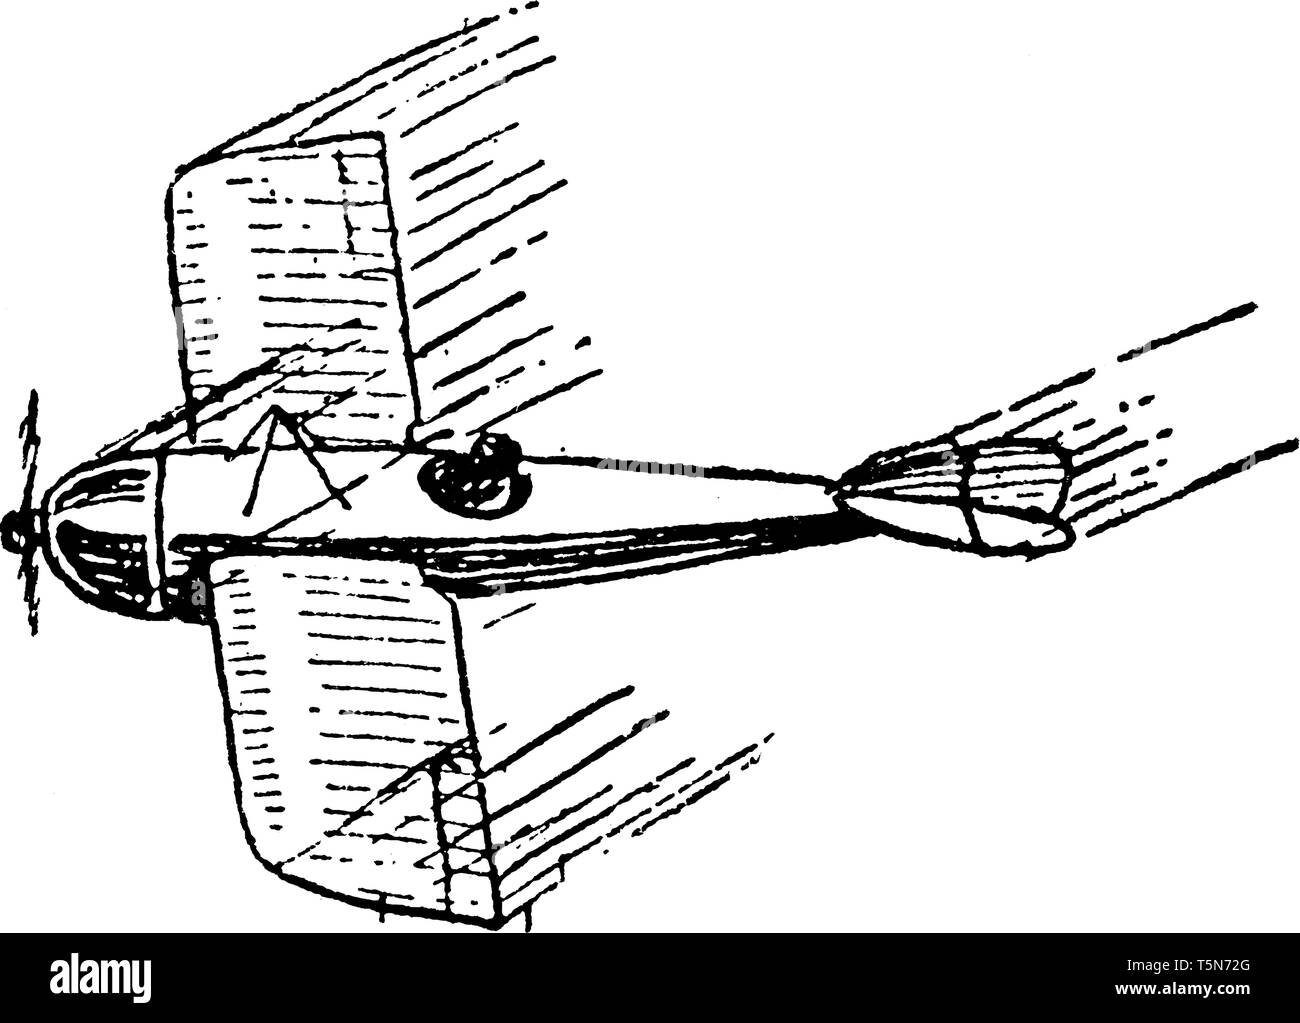 Airplane Sideslip Flying enters sideslip by lowering the wing and rudder while increasing speed, vintage line drawing or engraving illustration. Stock Vector